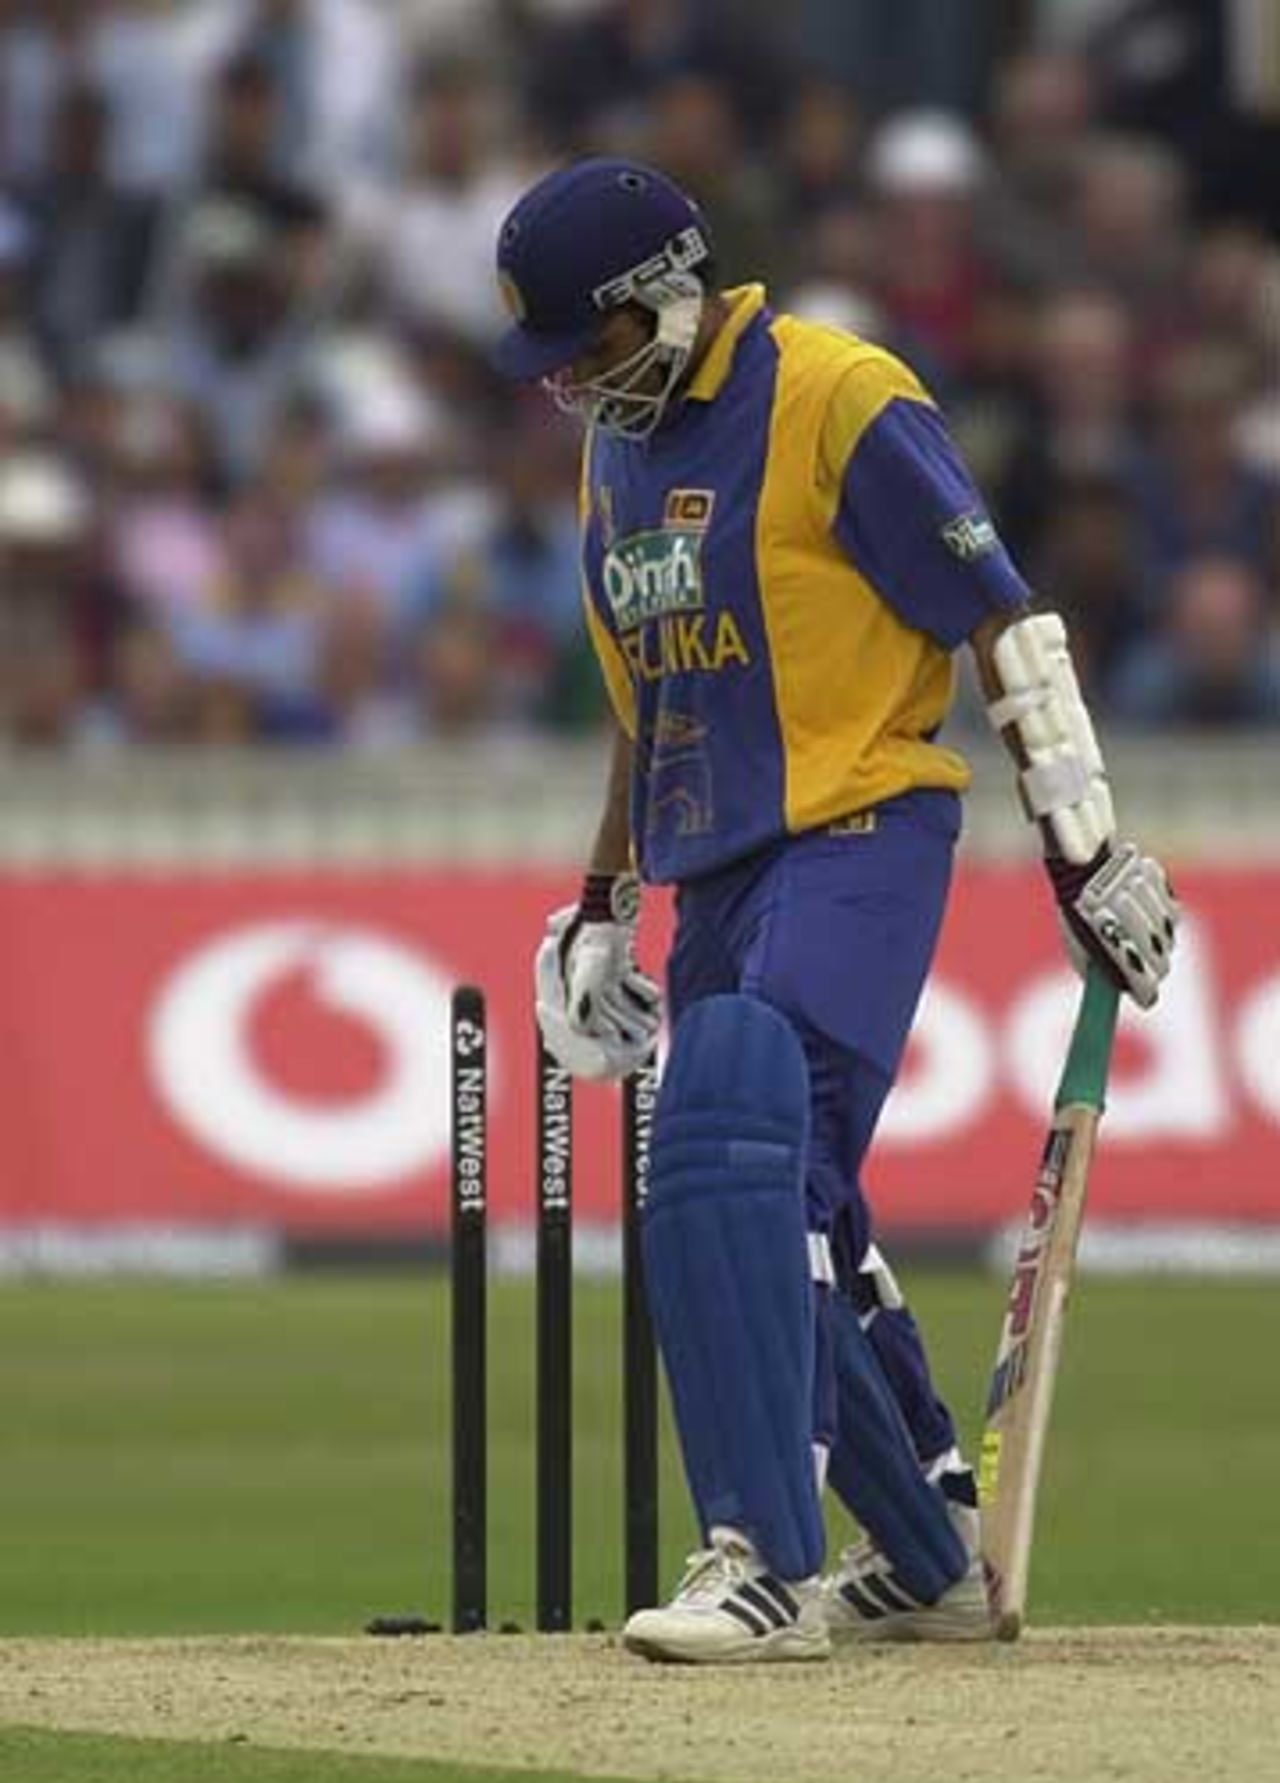 Atapattu is bowled for only 7 by Zaheer Khan, India v Sri Lanka, The Oval June 2002